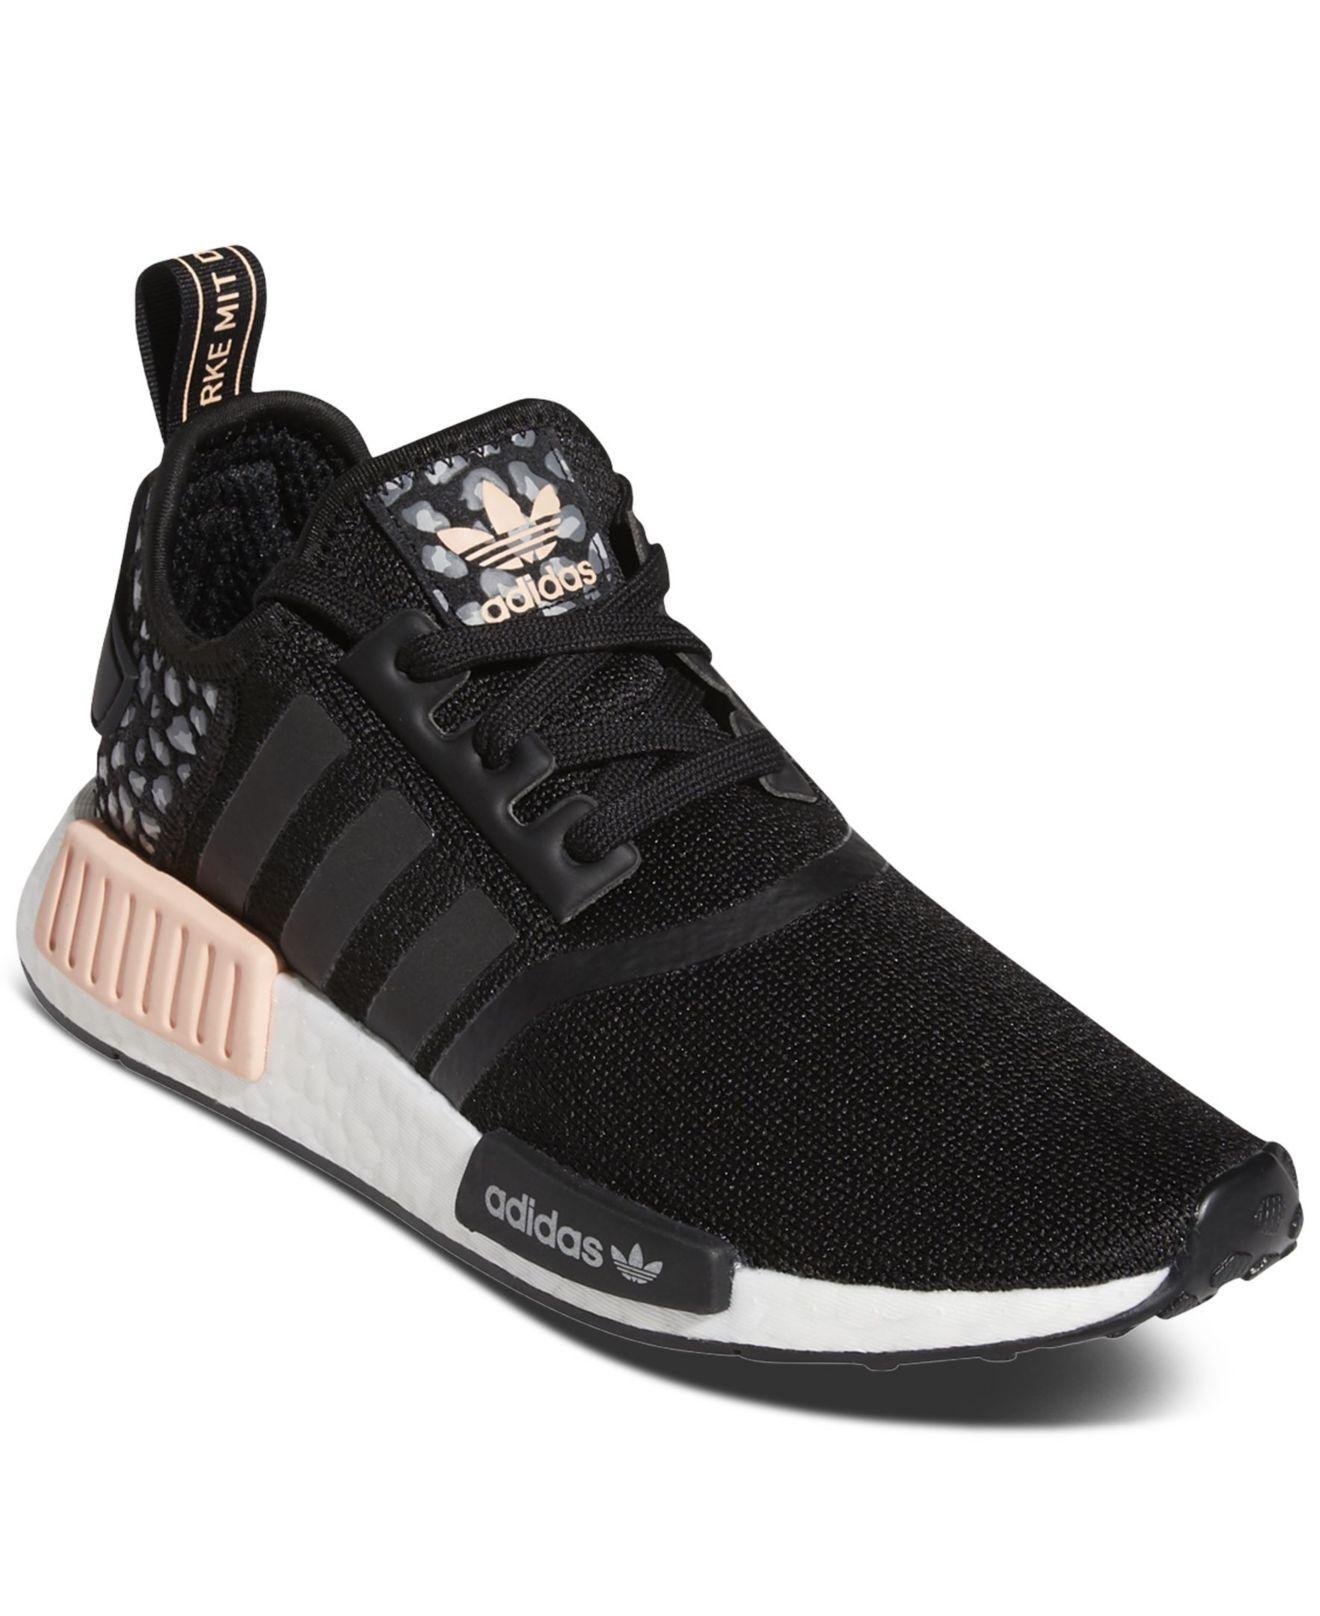 adidas Nmd R1 Animal Print Casual Sneakers From in Black | Lyst